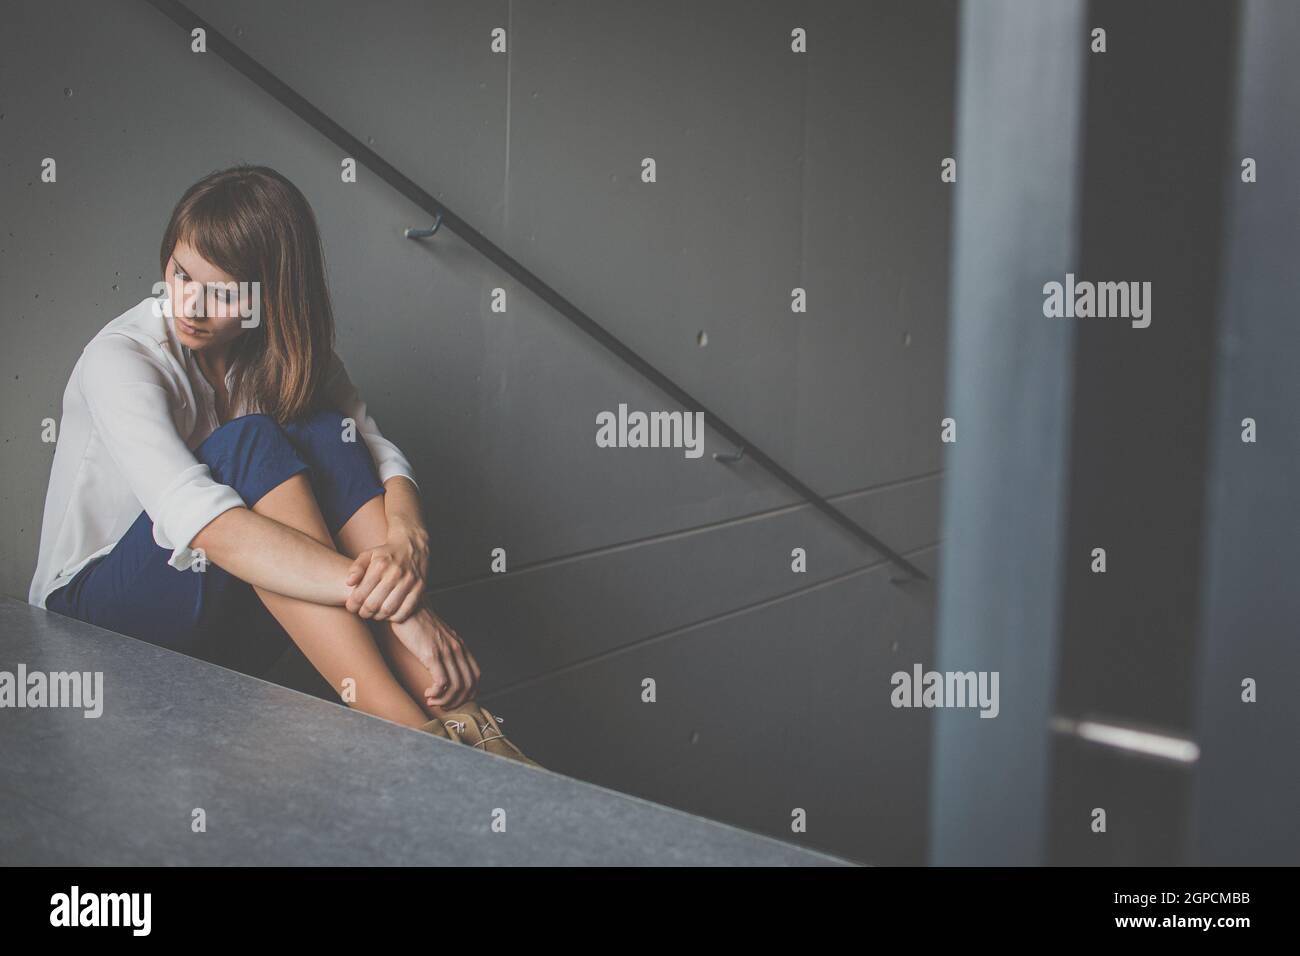 Depressed young woman sitting in a staircase, jobloss due to coronavirus pandemic, Covid-19 outbreak. Unemployment, economic crisis, financial distres Stock Photo